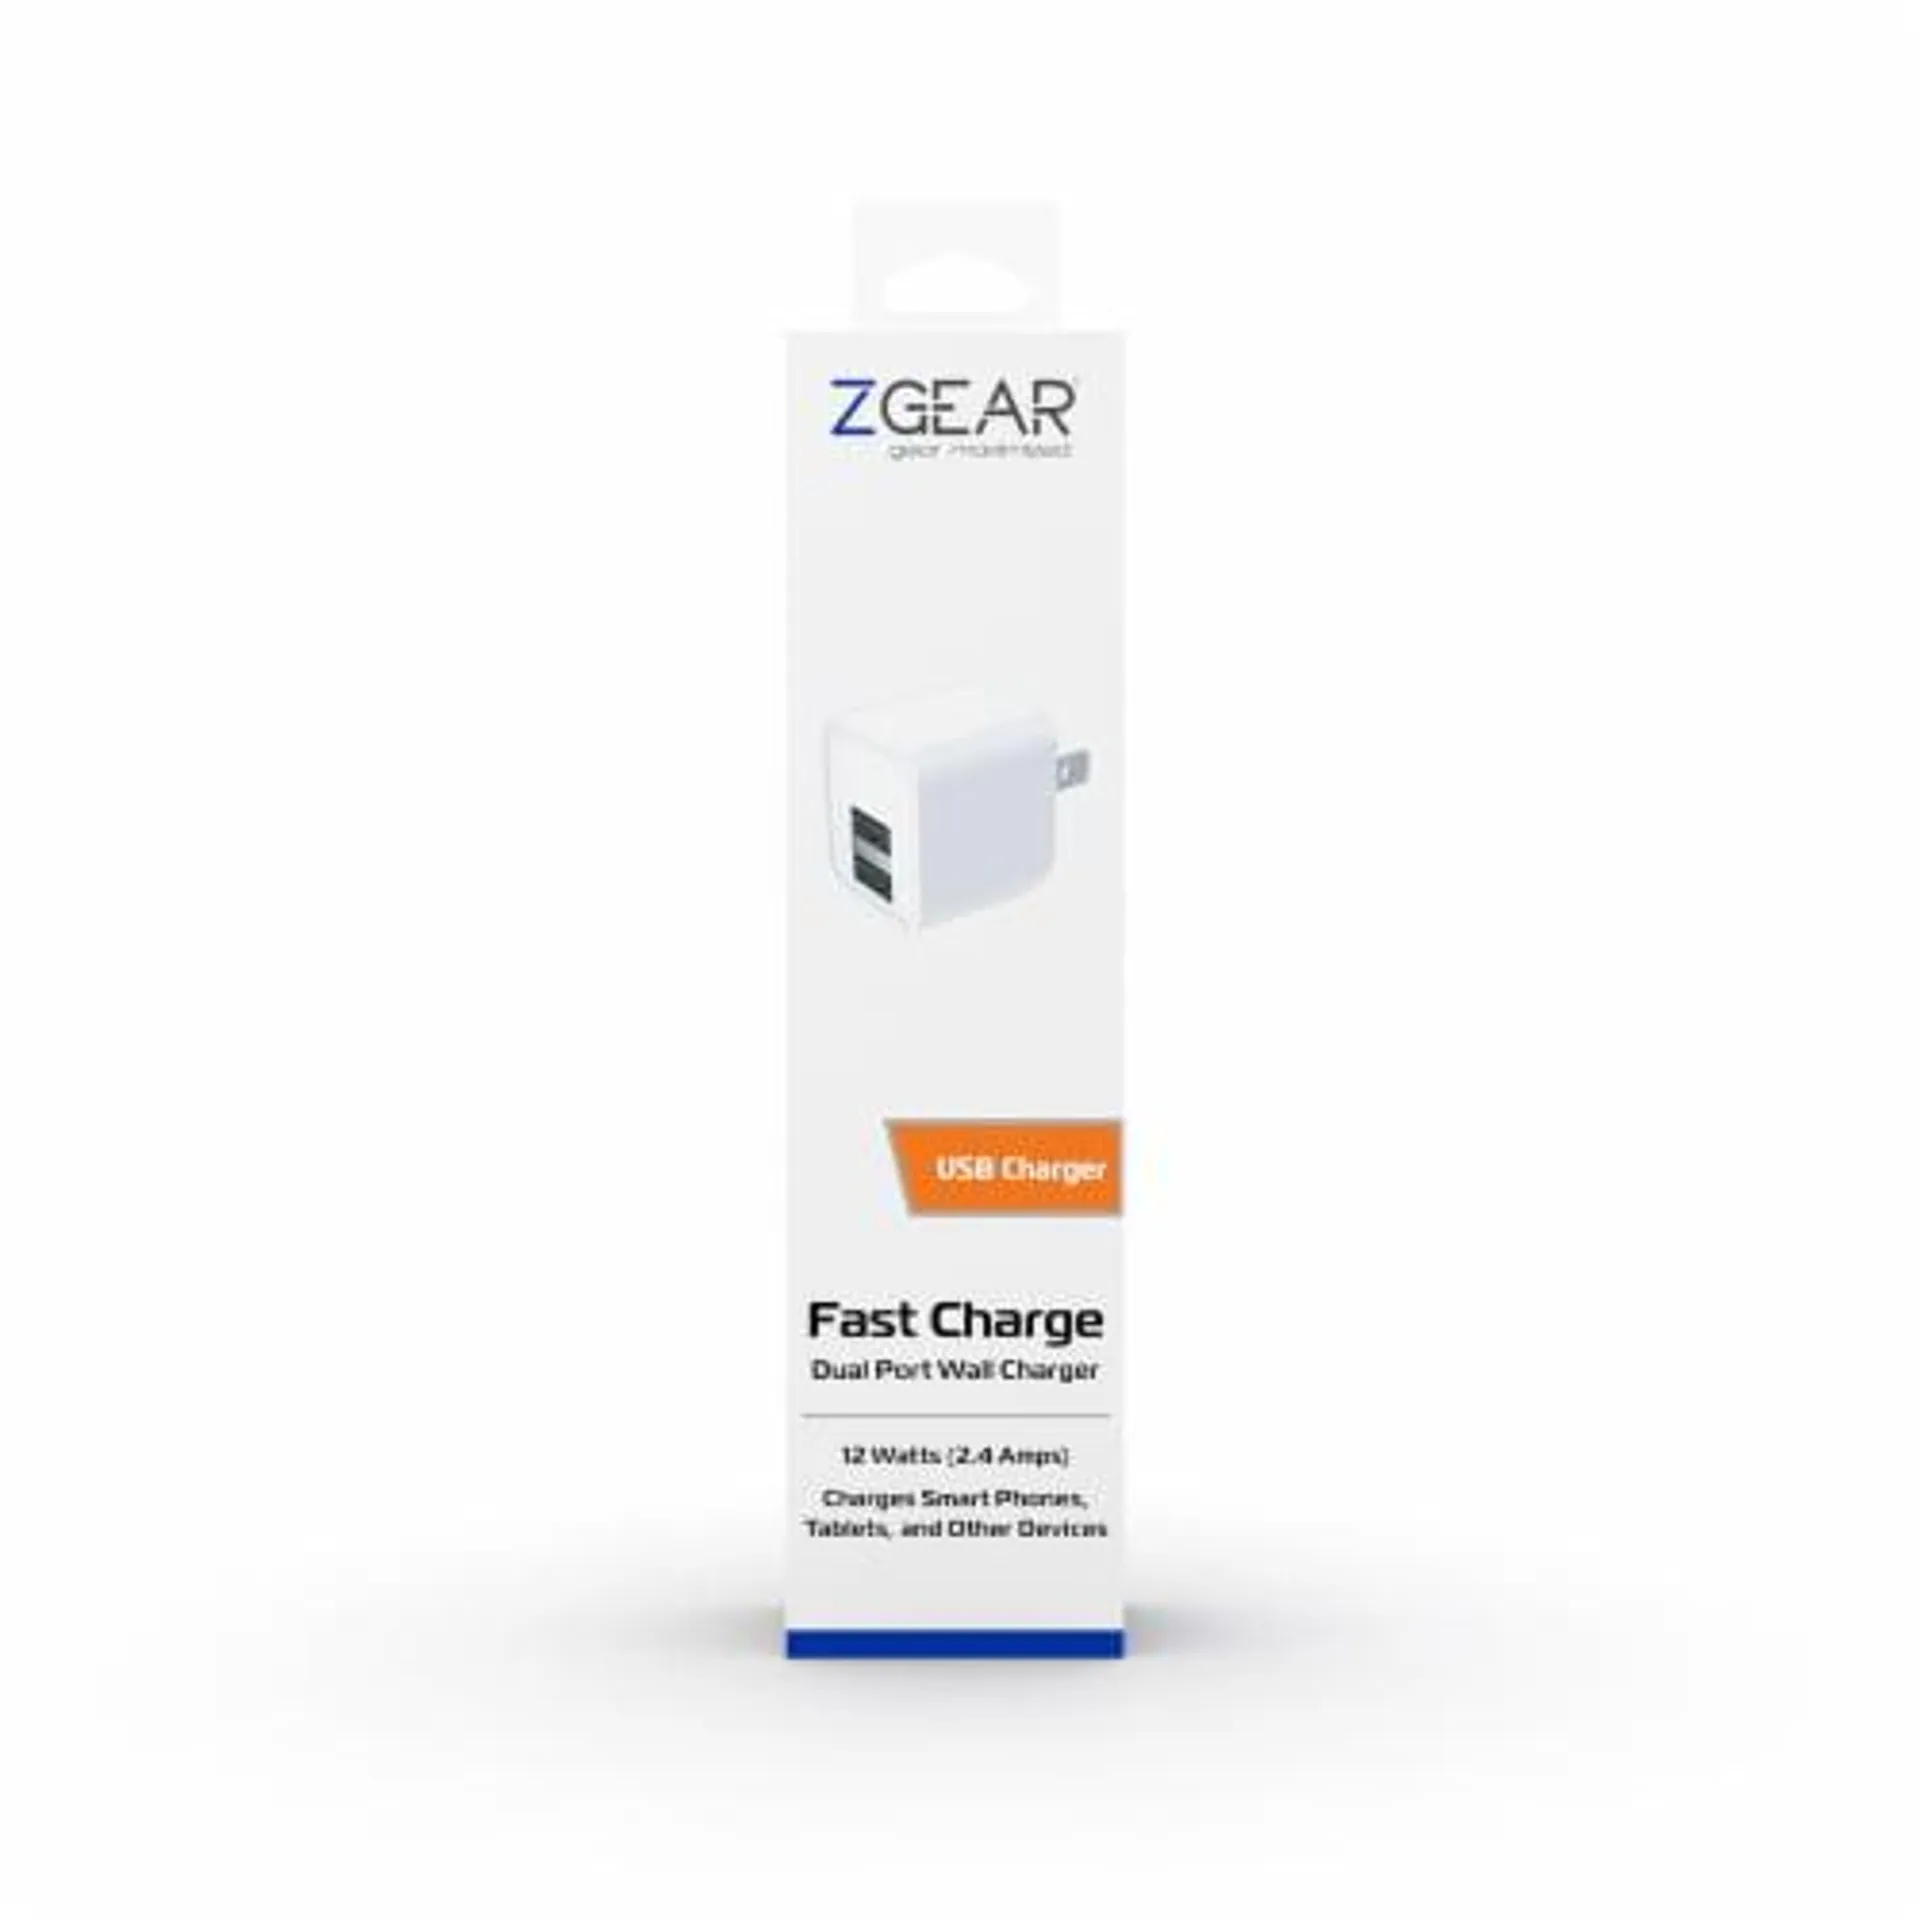 ZGear High Power Dual Port USB Wall Charger - White